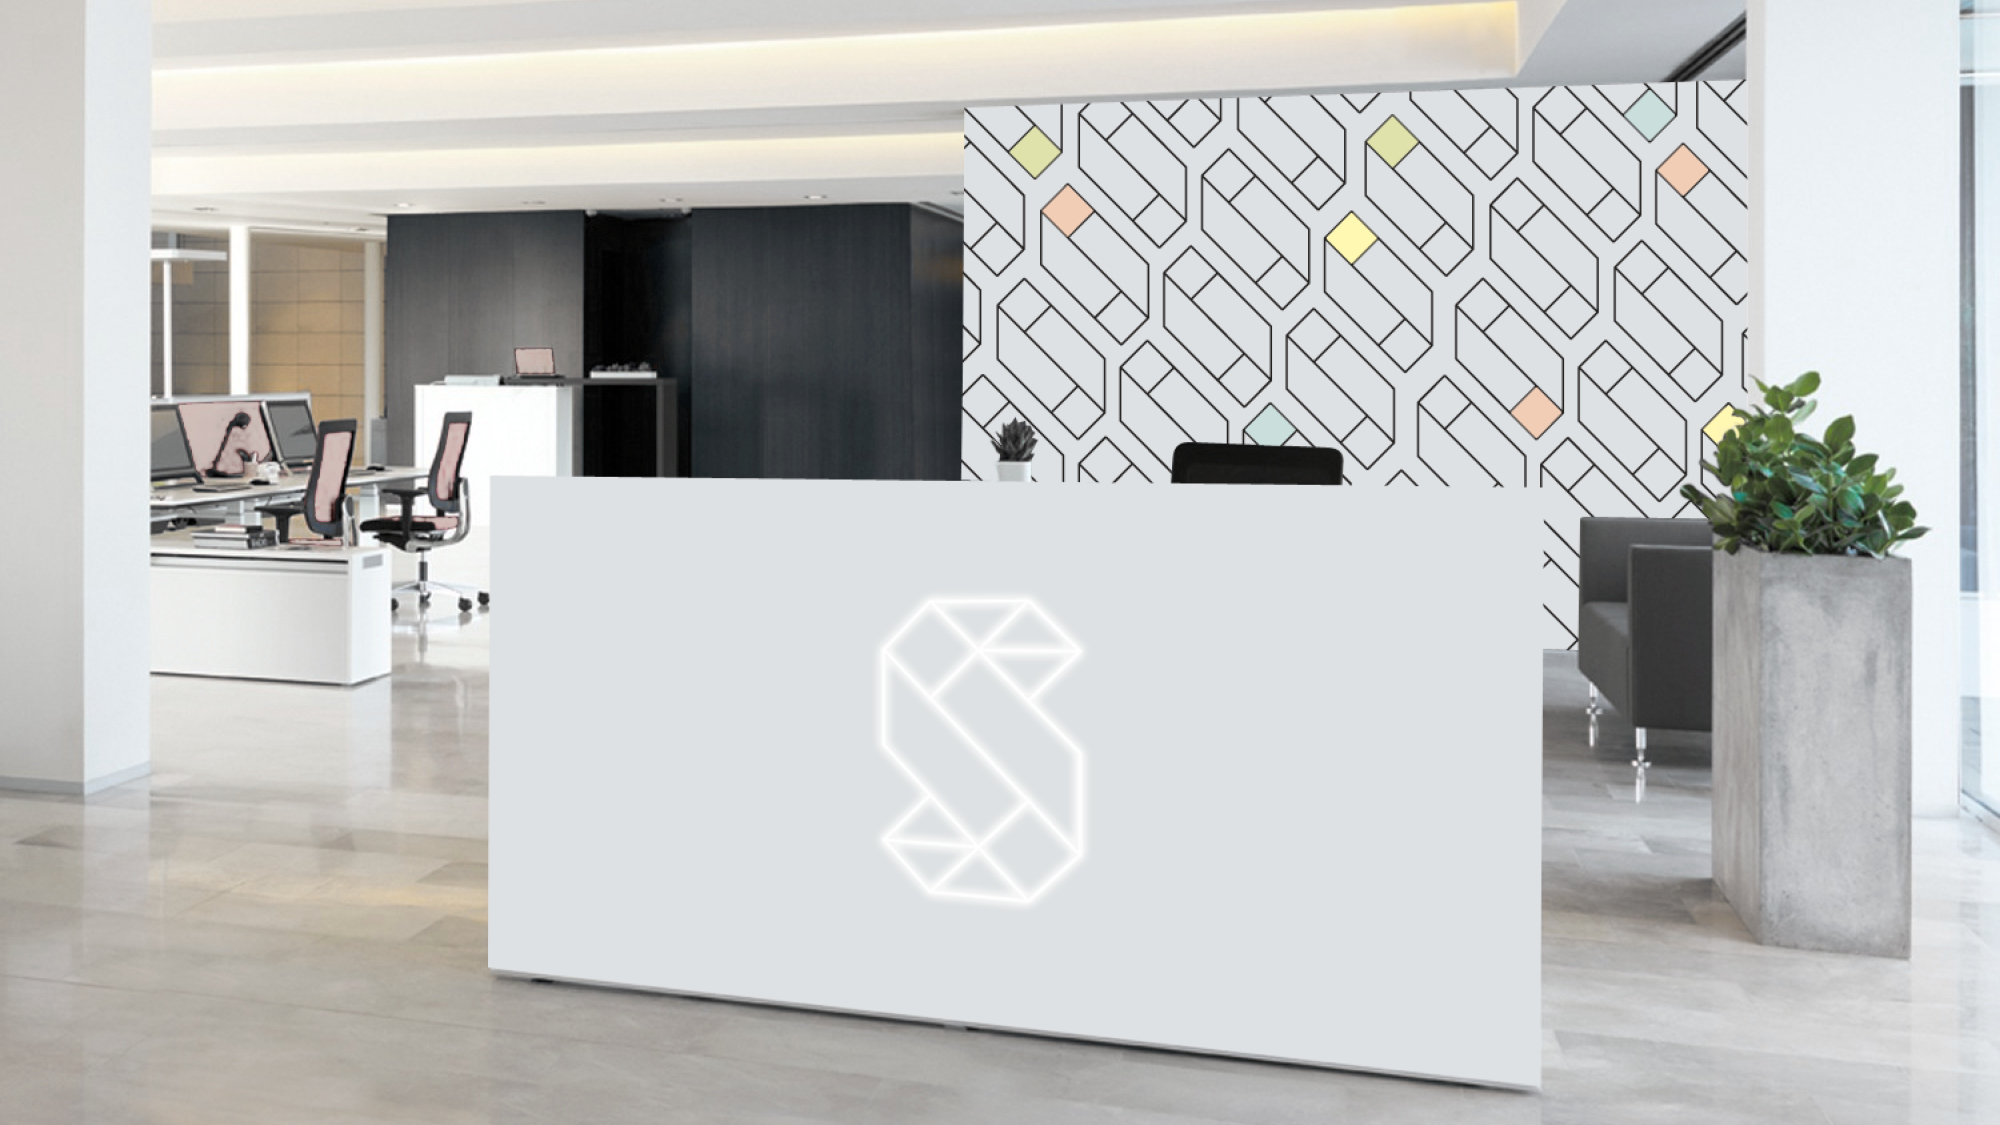 Entity-3-Three-Brand-Design-Agency-Sydney-Property-and-Placemaking-15-environments-experience-signage-reception